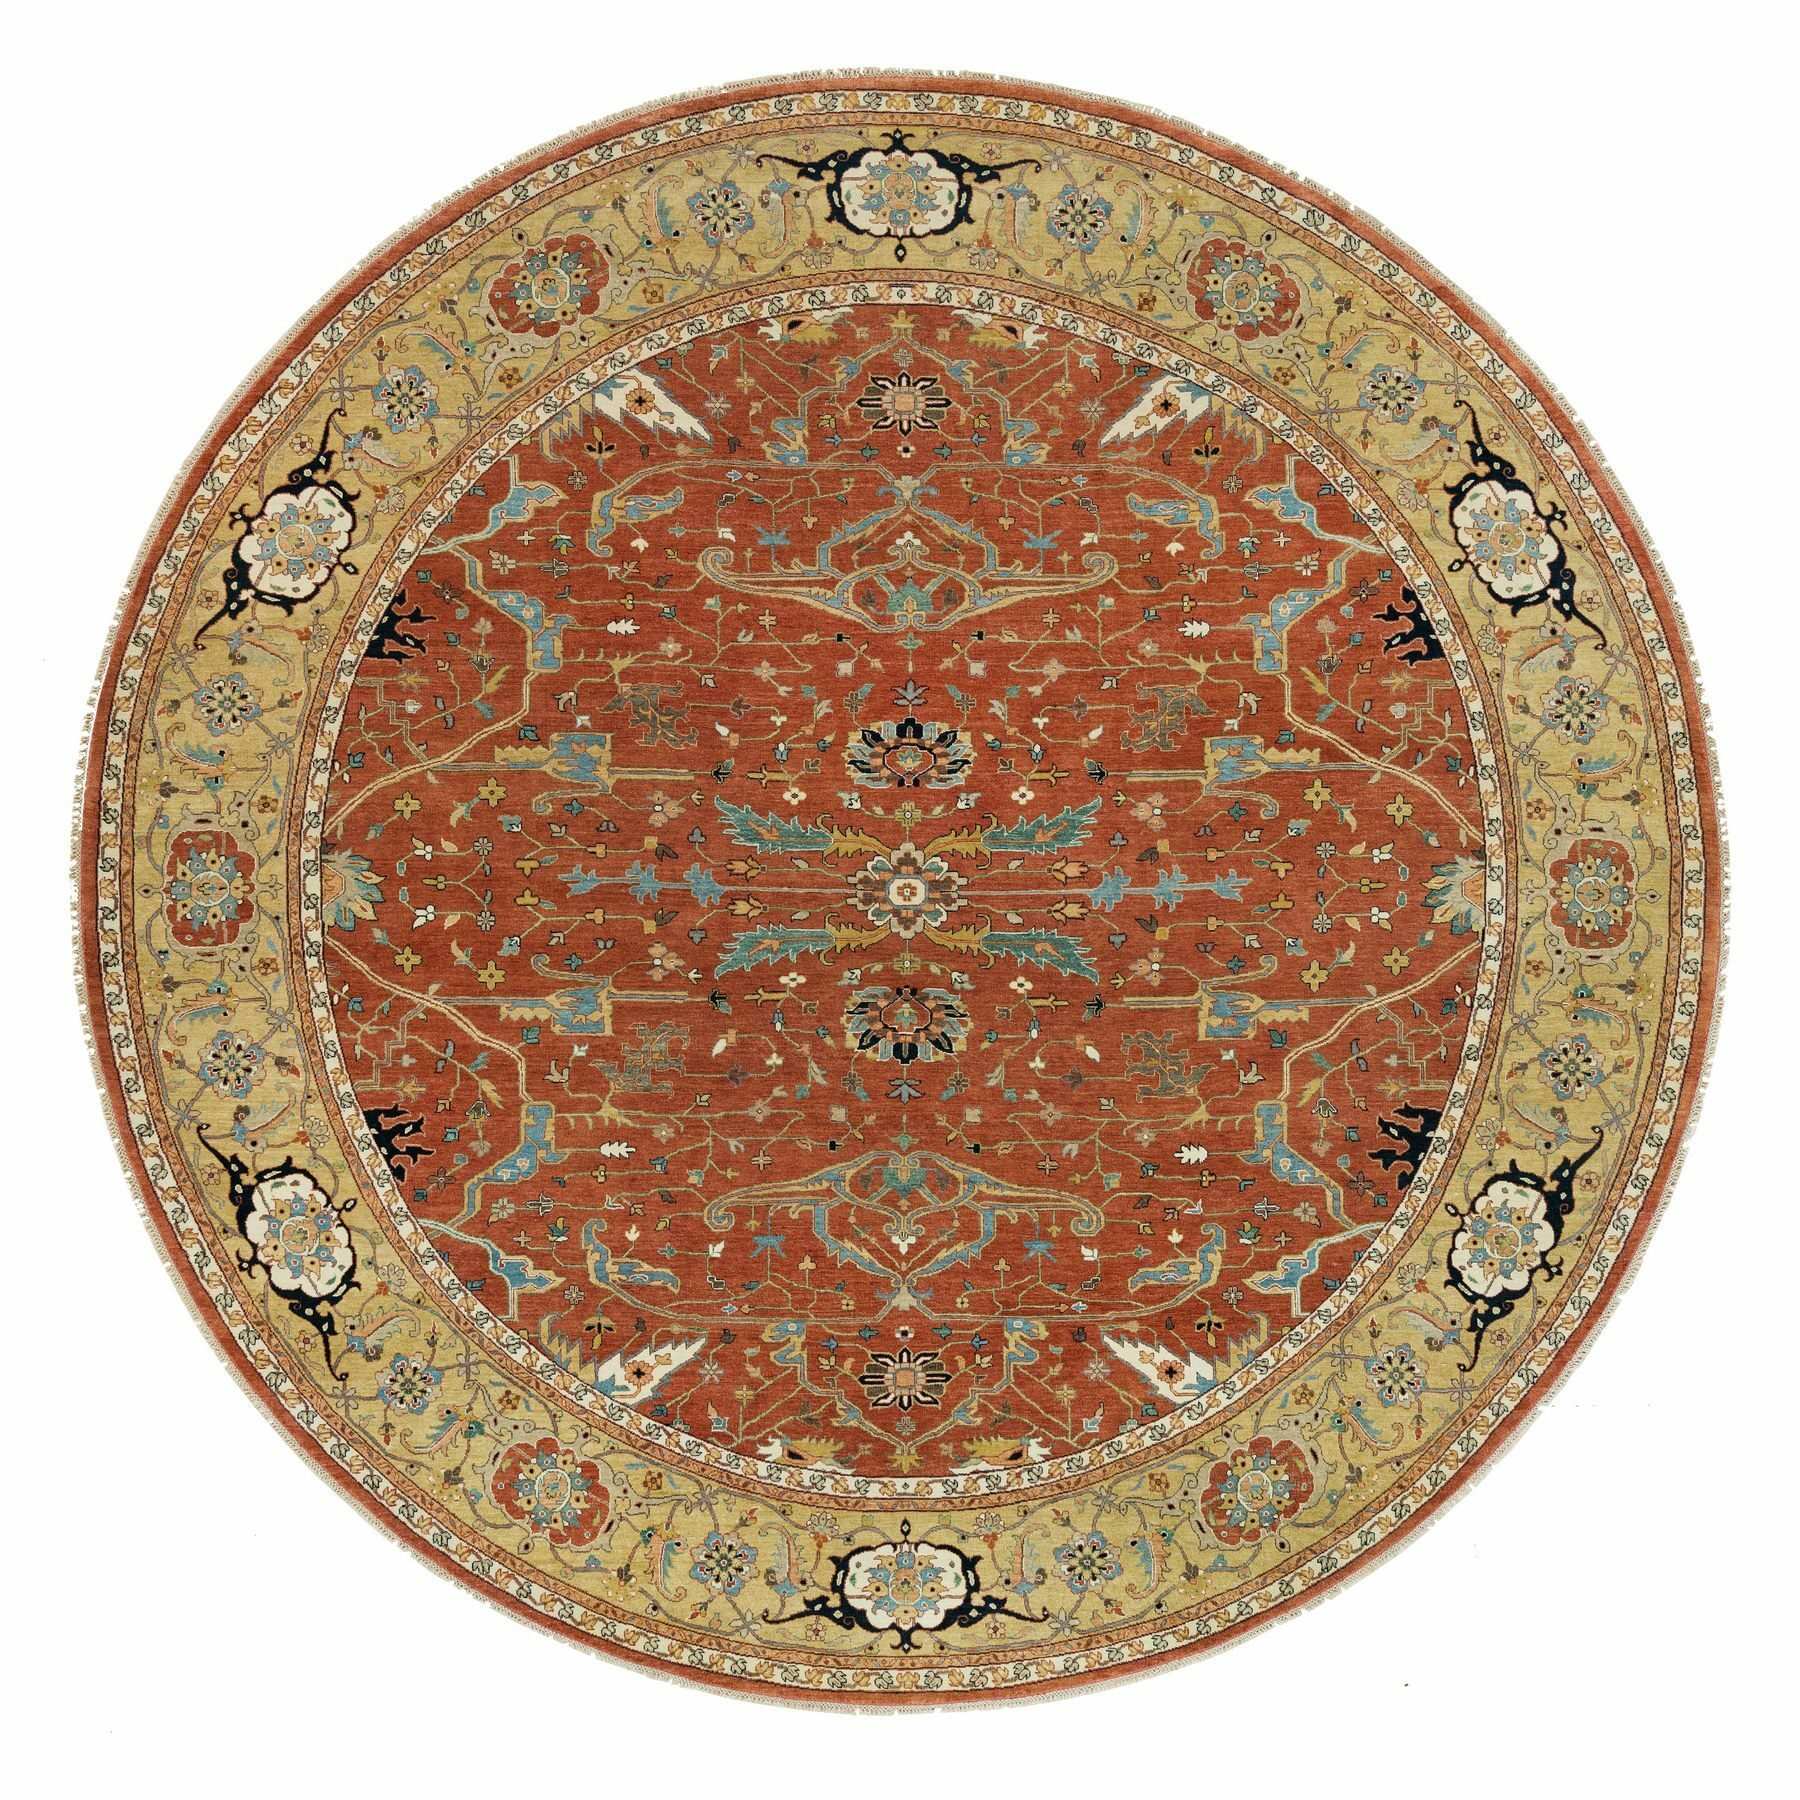 12'x12' Blush Red, Soft Pile, Natural Dyes, Antiqued Fine Heriz Re-Creation, Densely Woven, Extra Soft Wool, Hand Woven, Round Oriental Rug 